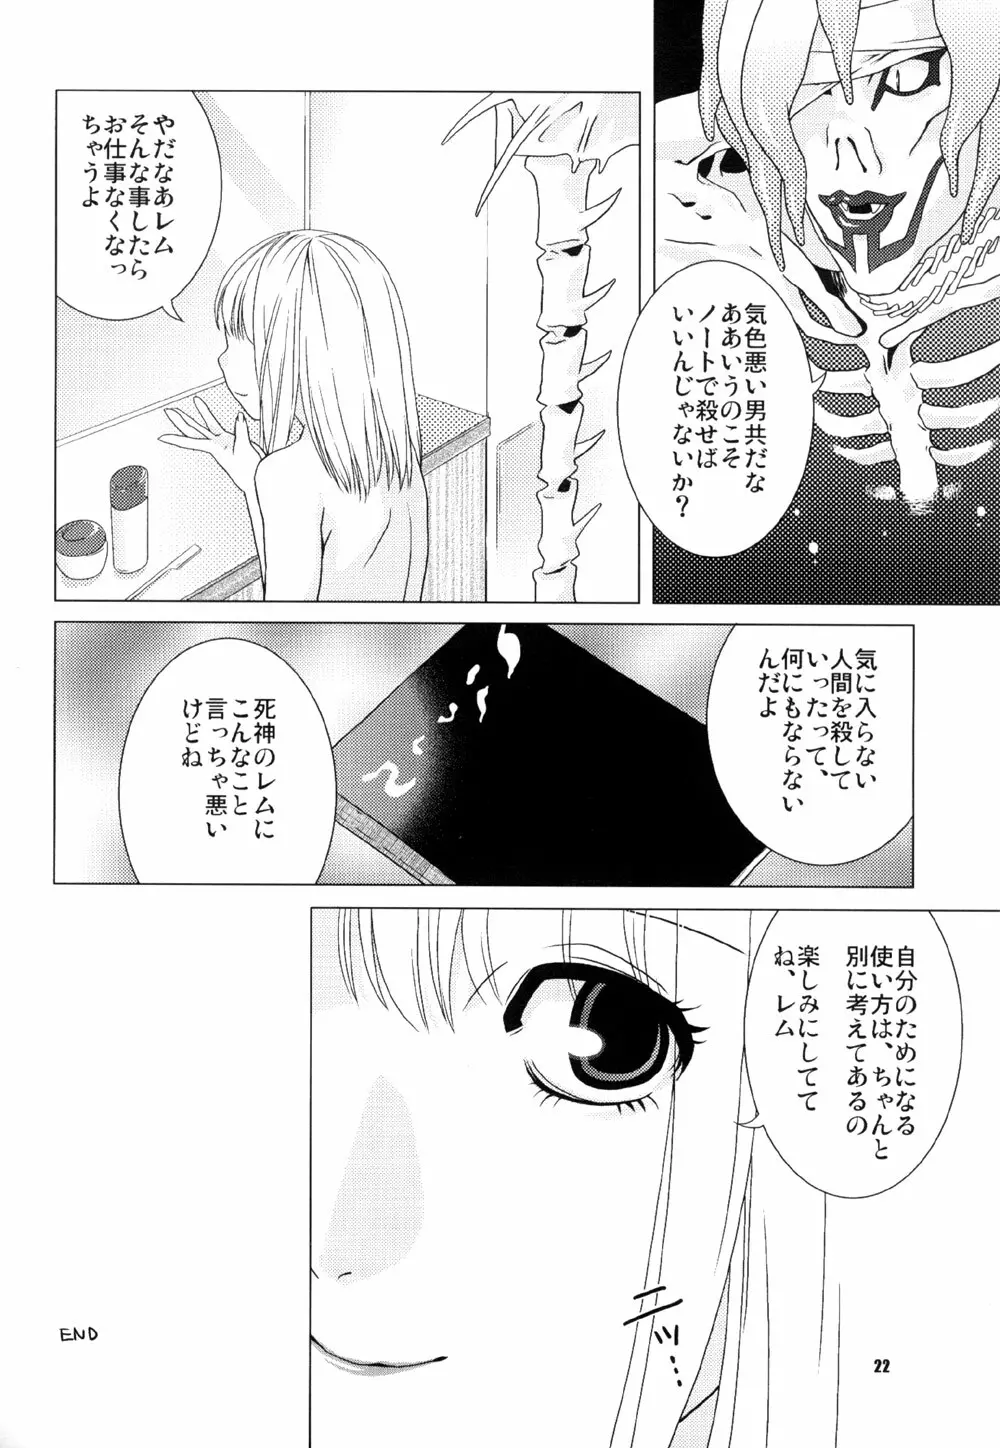 Misa Note - page22